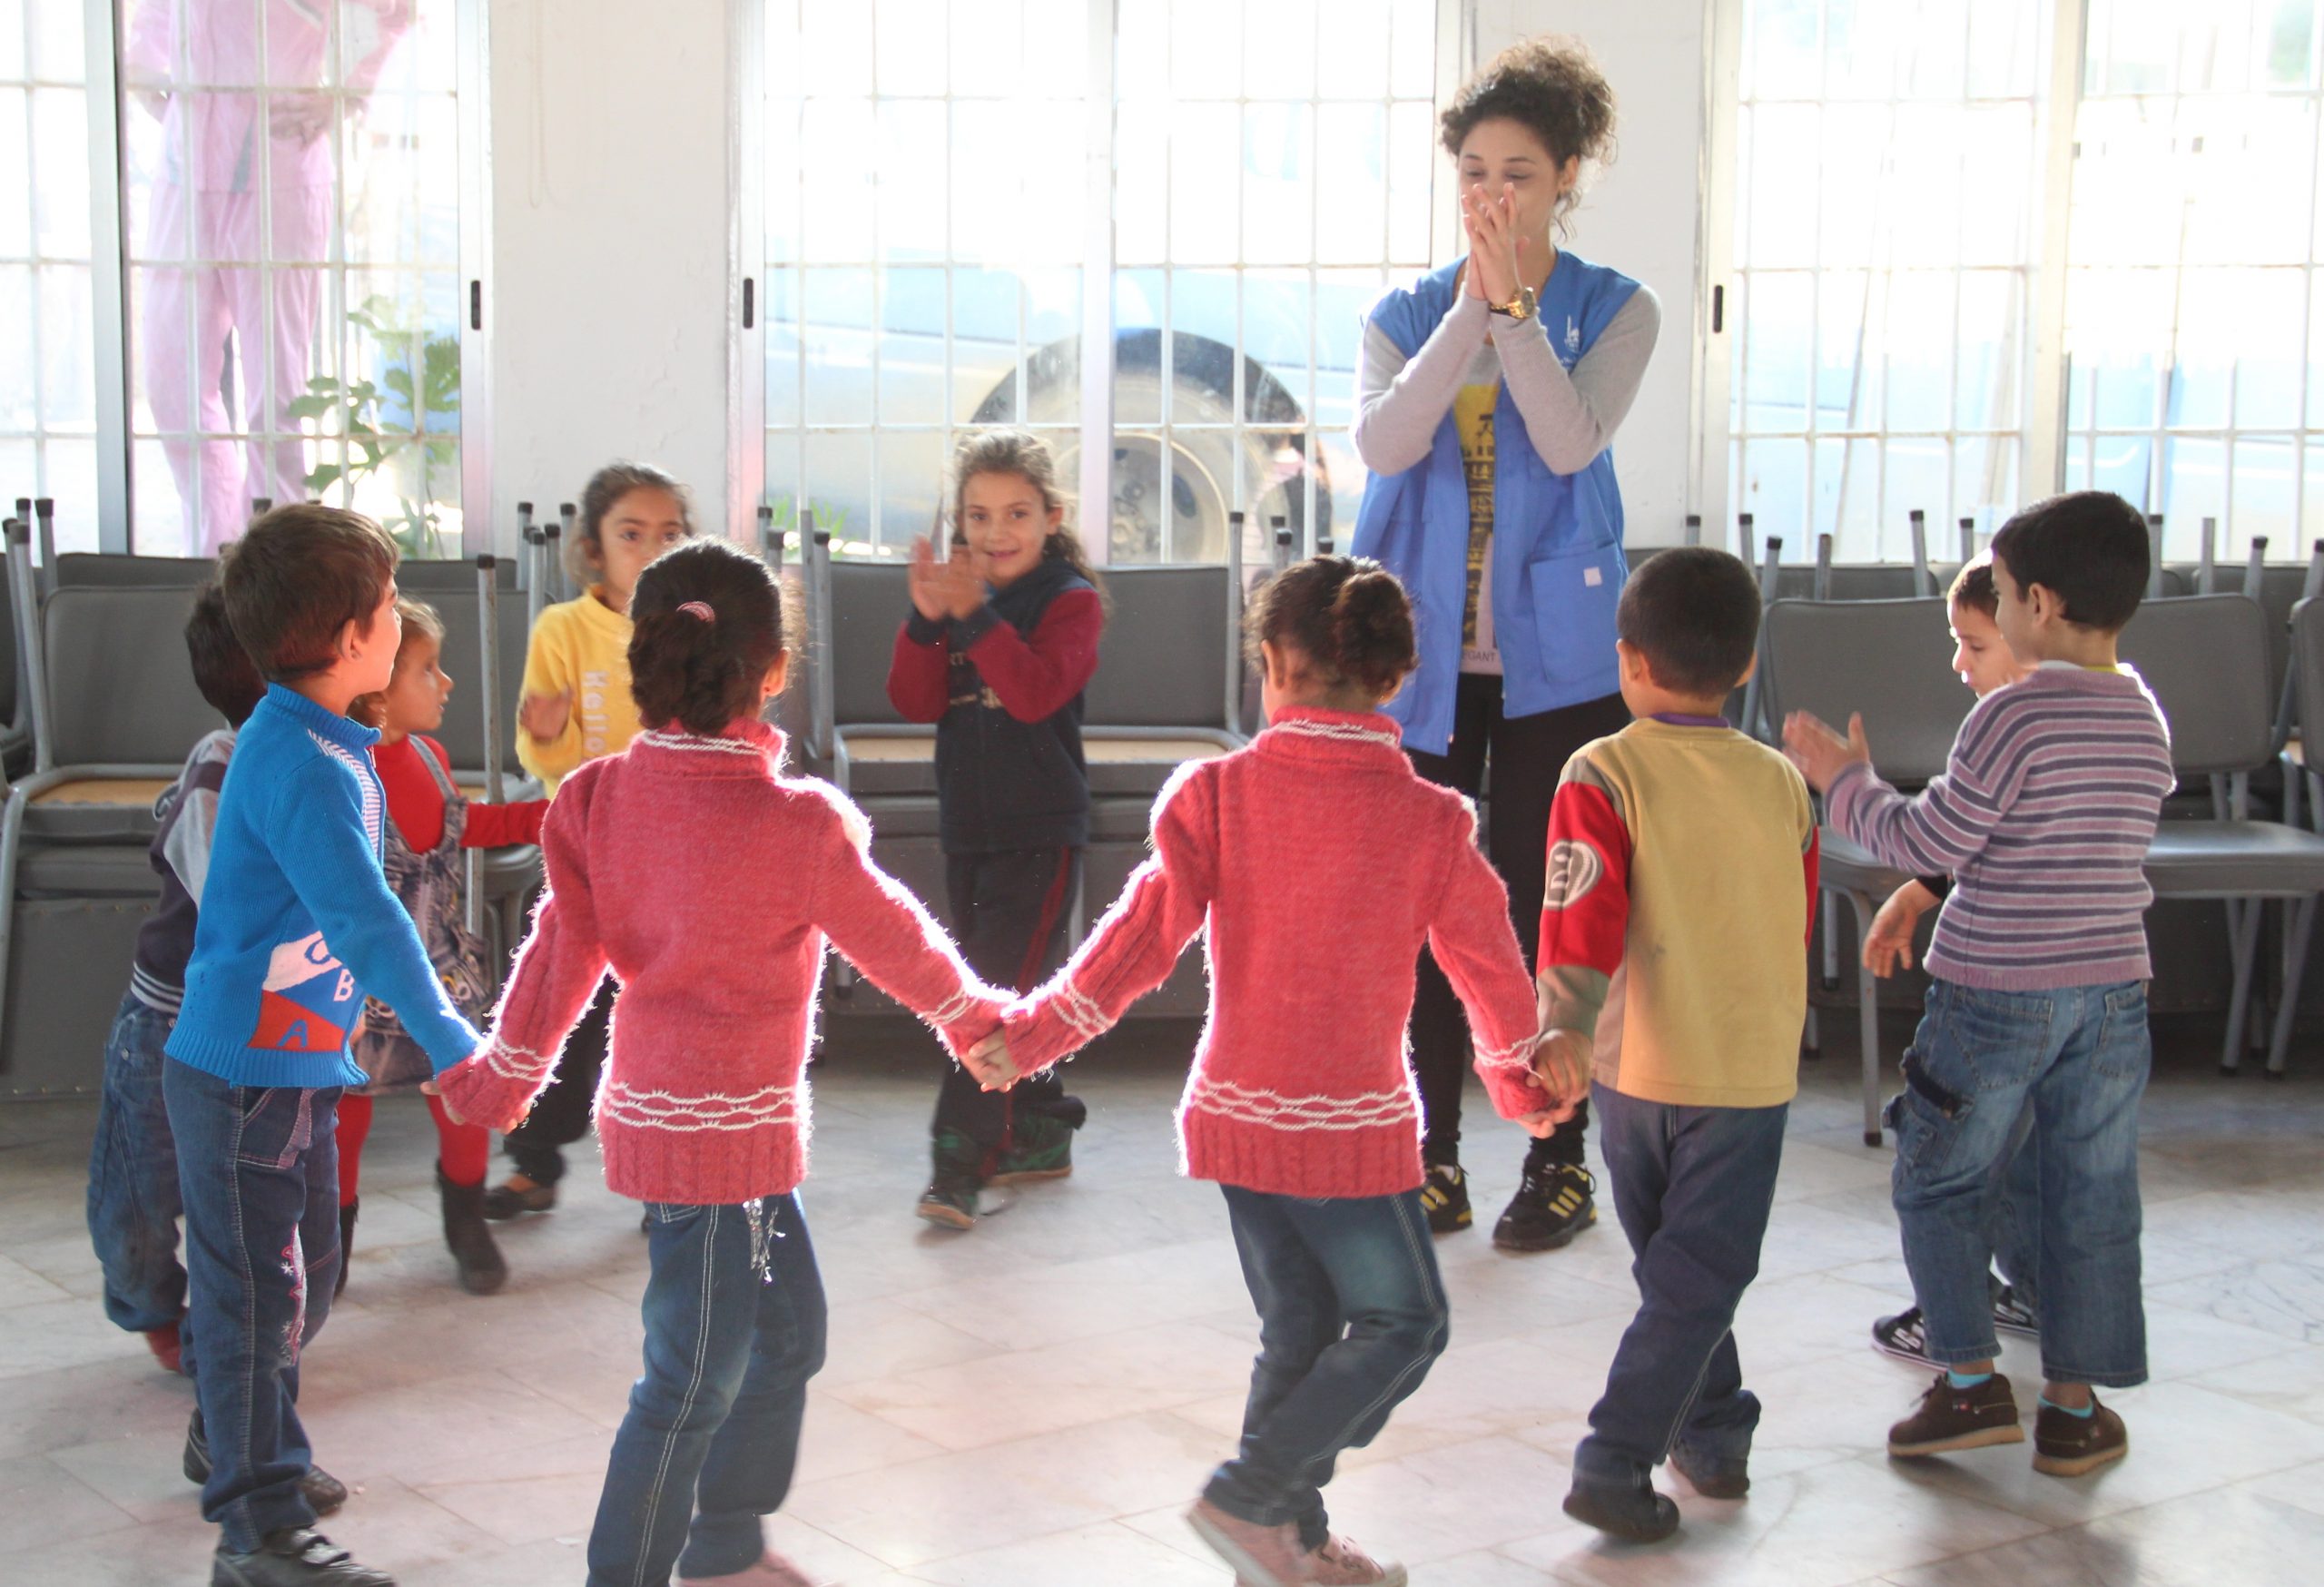 Children playing together as part of the project